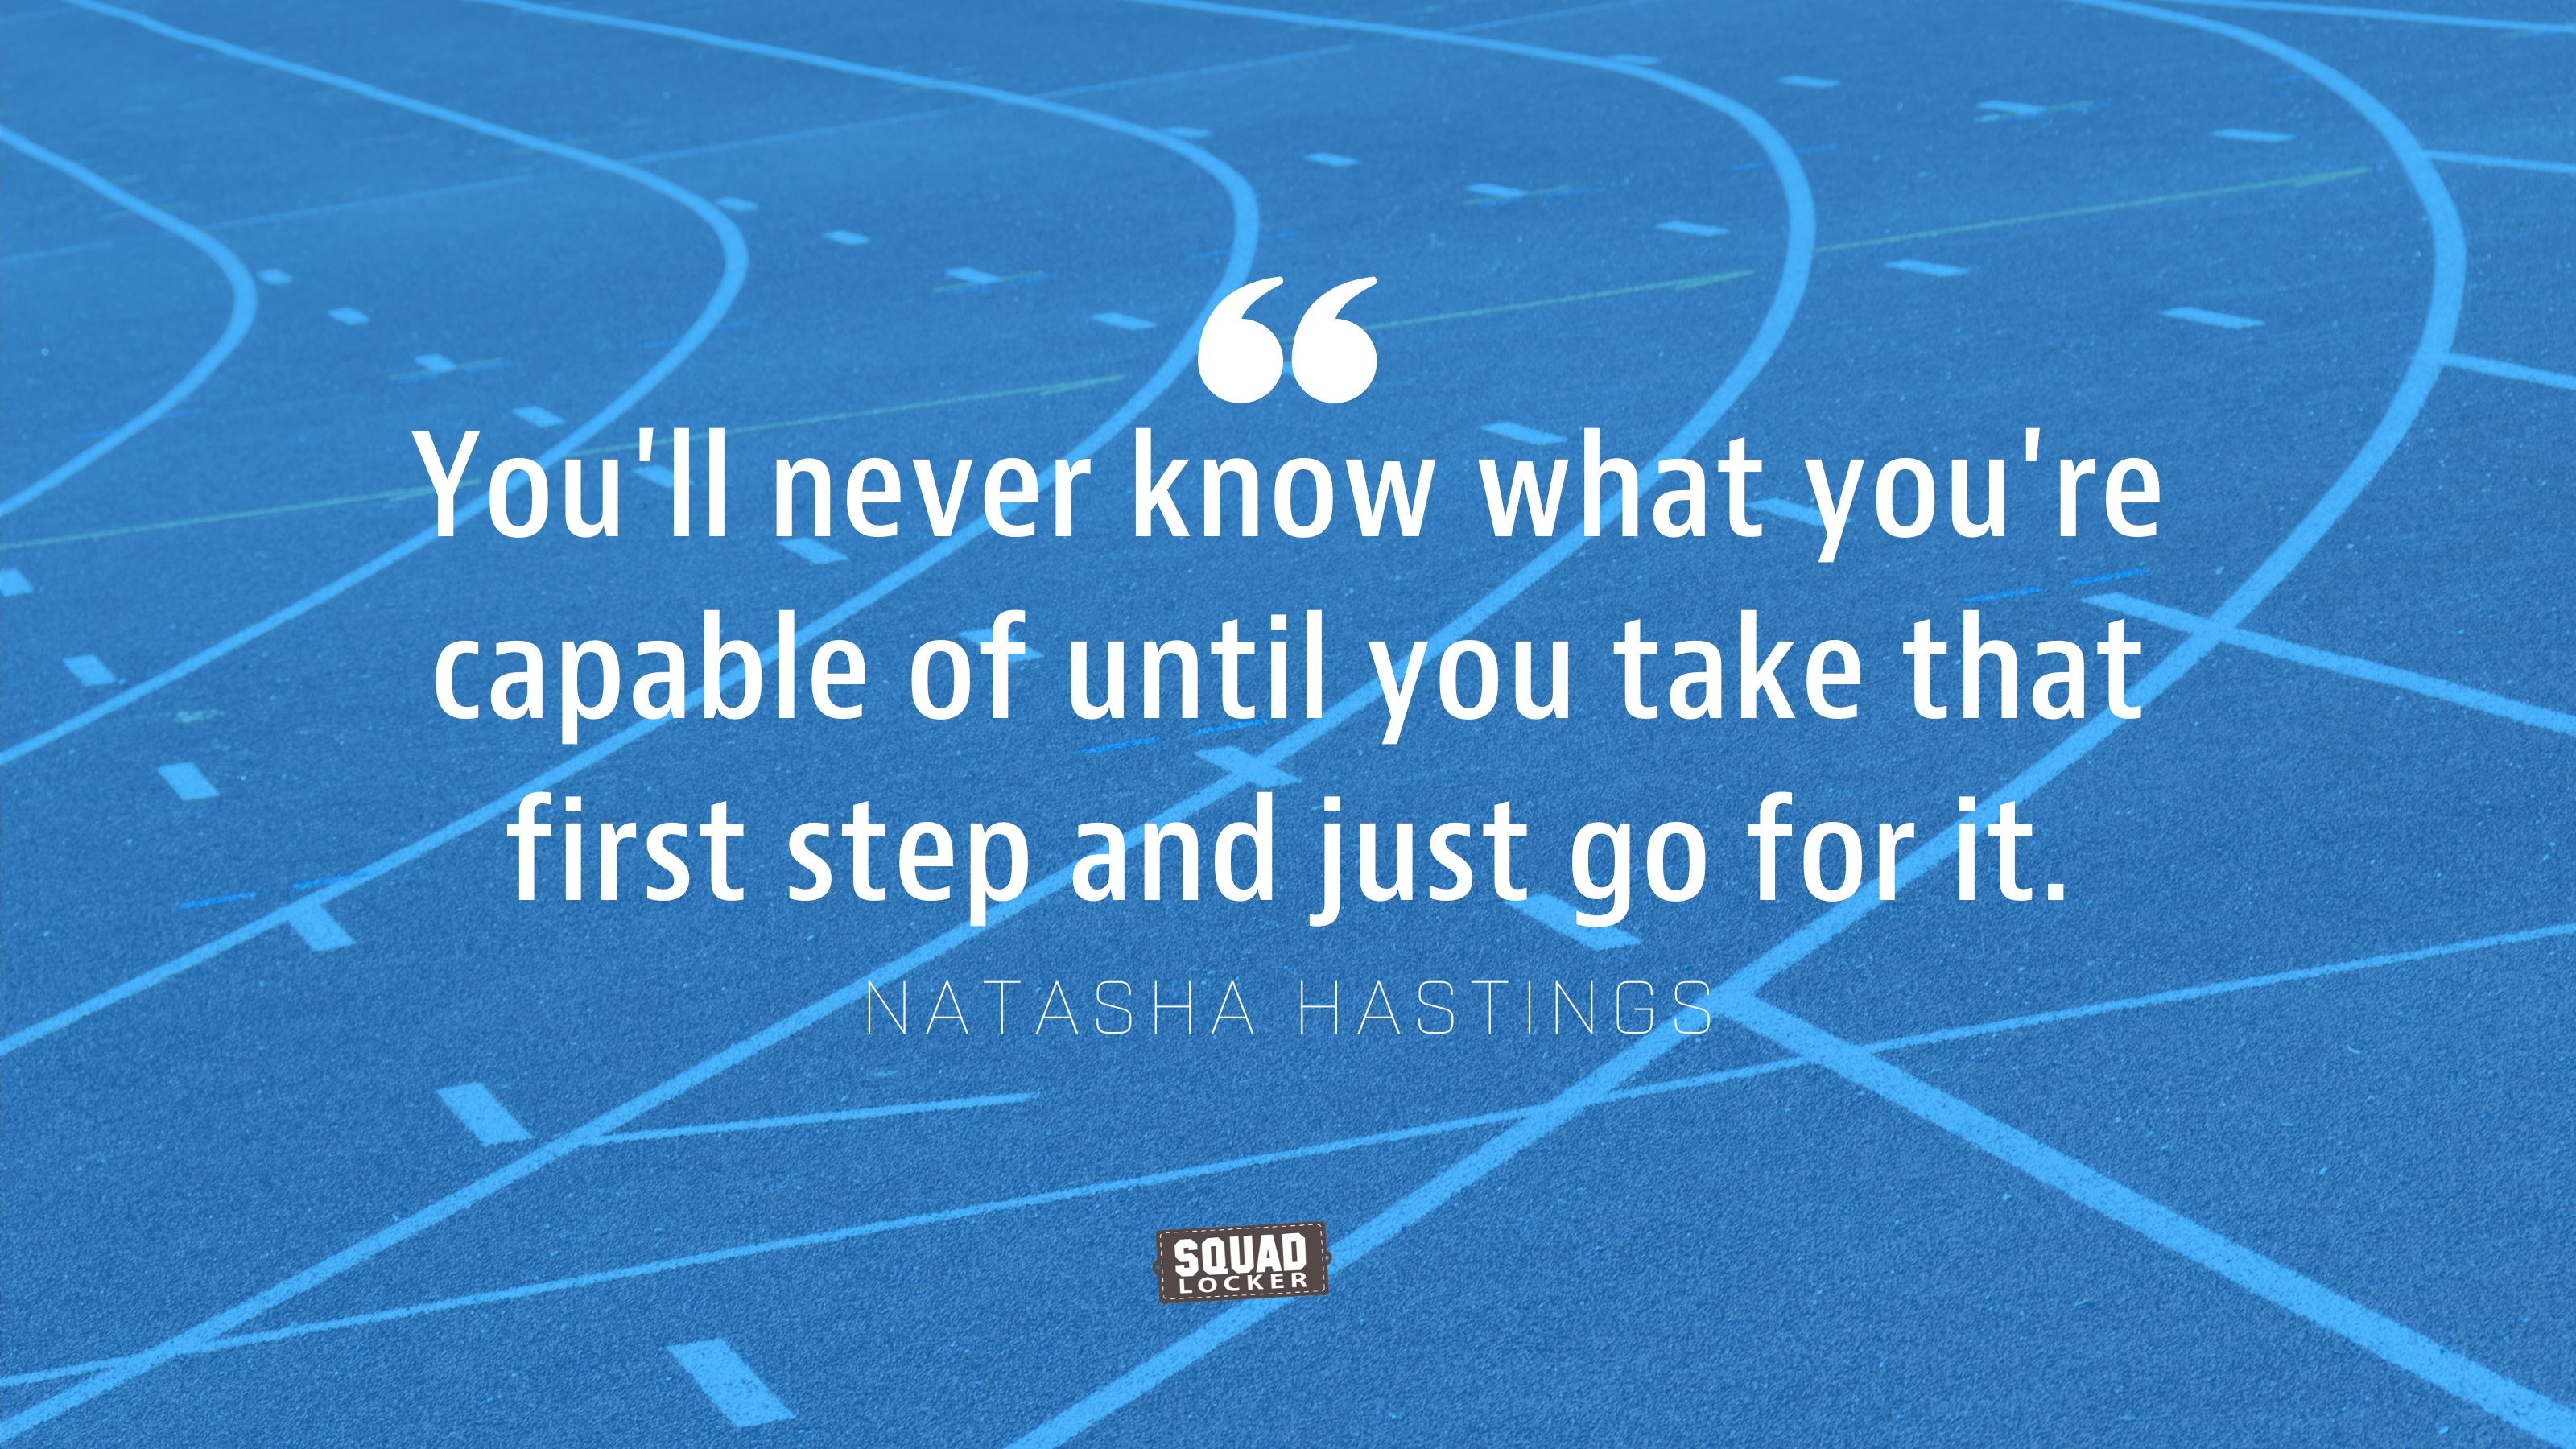 15 Inspiring Sports Quotes for Athletes and Coaches Alike